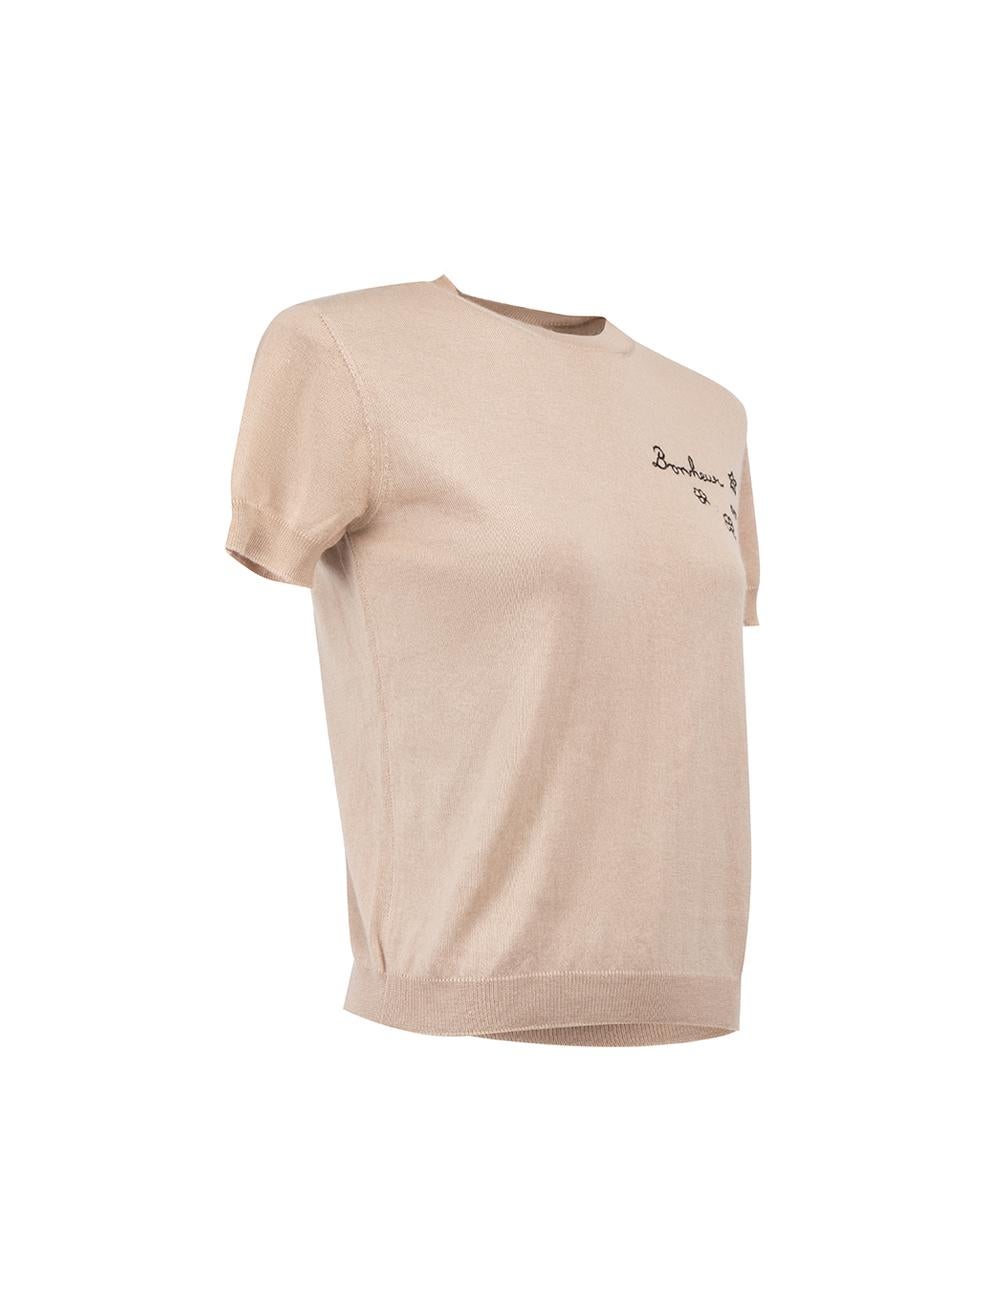 CONDITION is Very good. Minimal wear to top is evident where a small hole on back and discolouration mark round the neck can be seen on this used Christian Dior designer resale item.



Details


Beige

Cashmere

Short sleeves knit top

Round